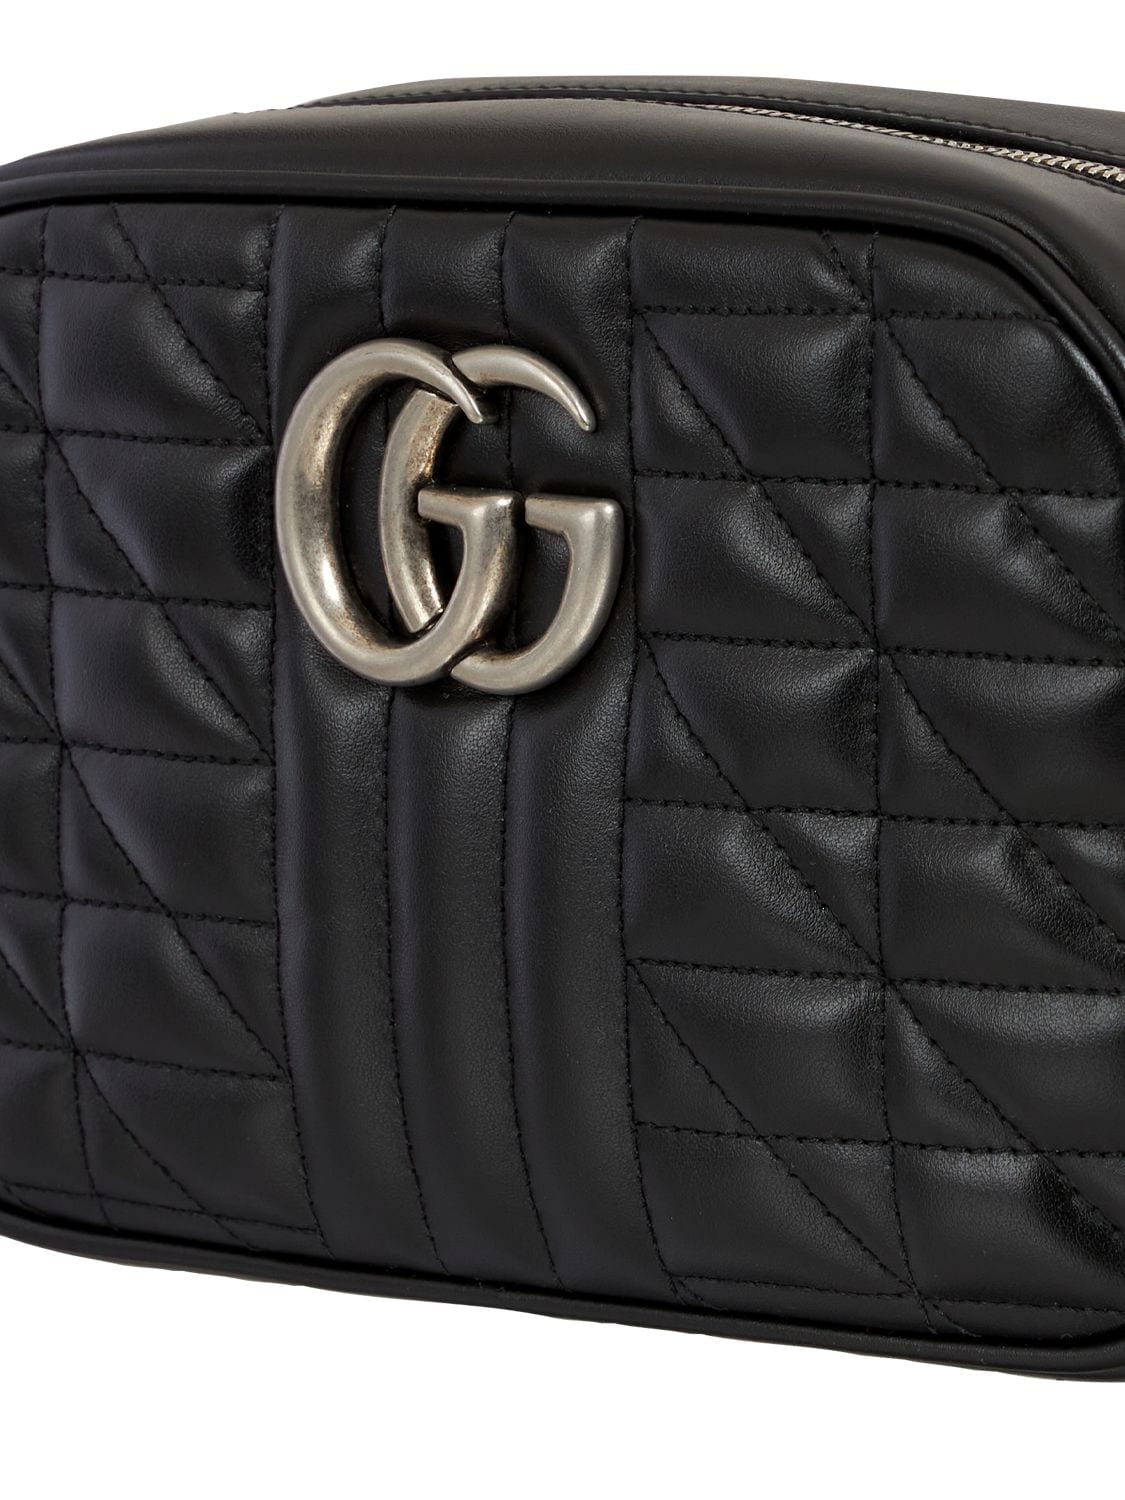 GUCCI Small Gg Marmont 2.0 Camera Bag for Women